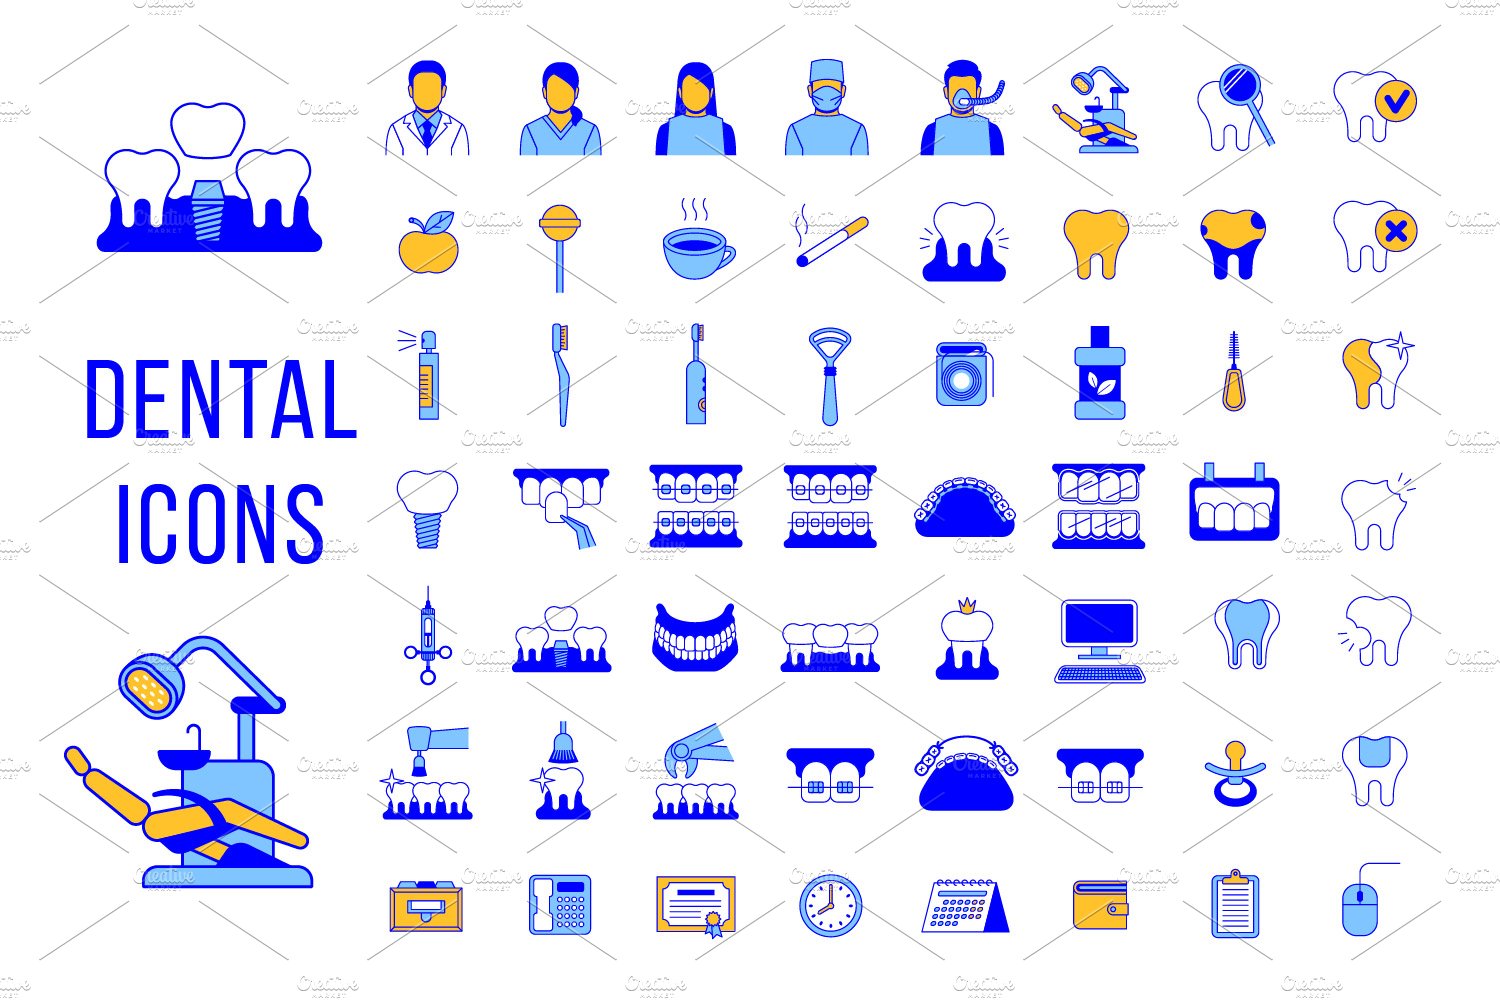 Dental Clinic Services Line Icons cover image.